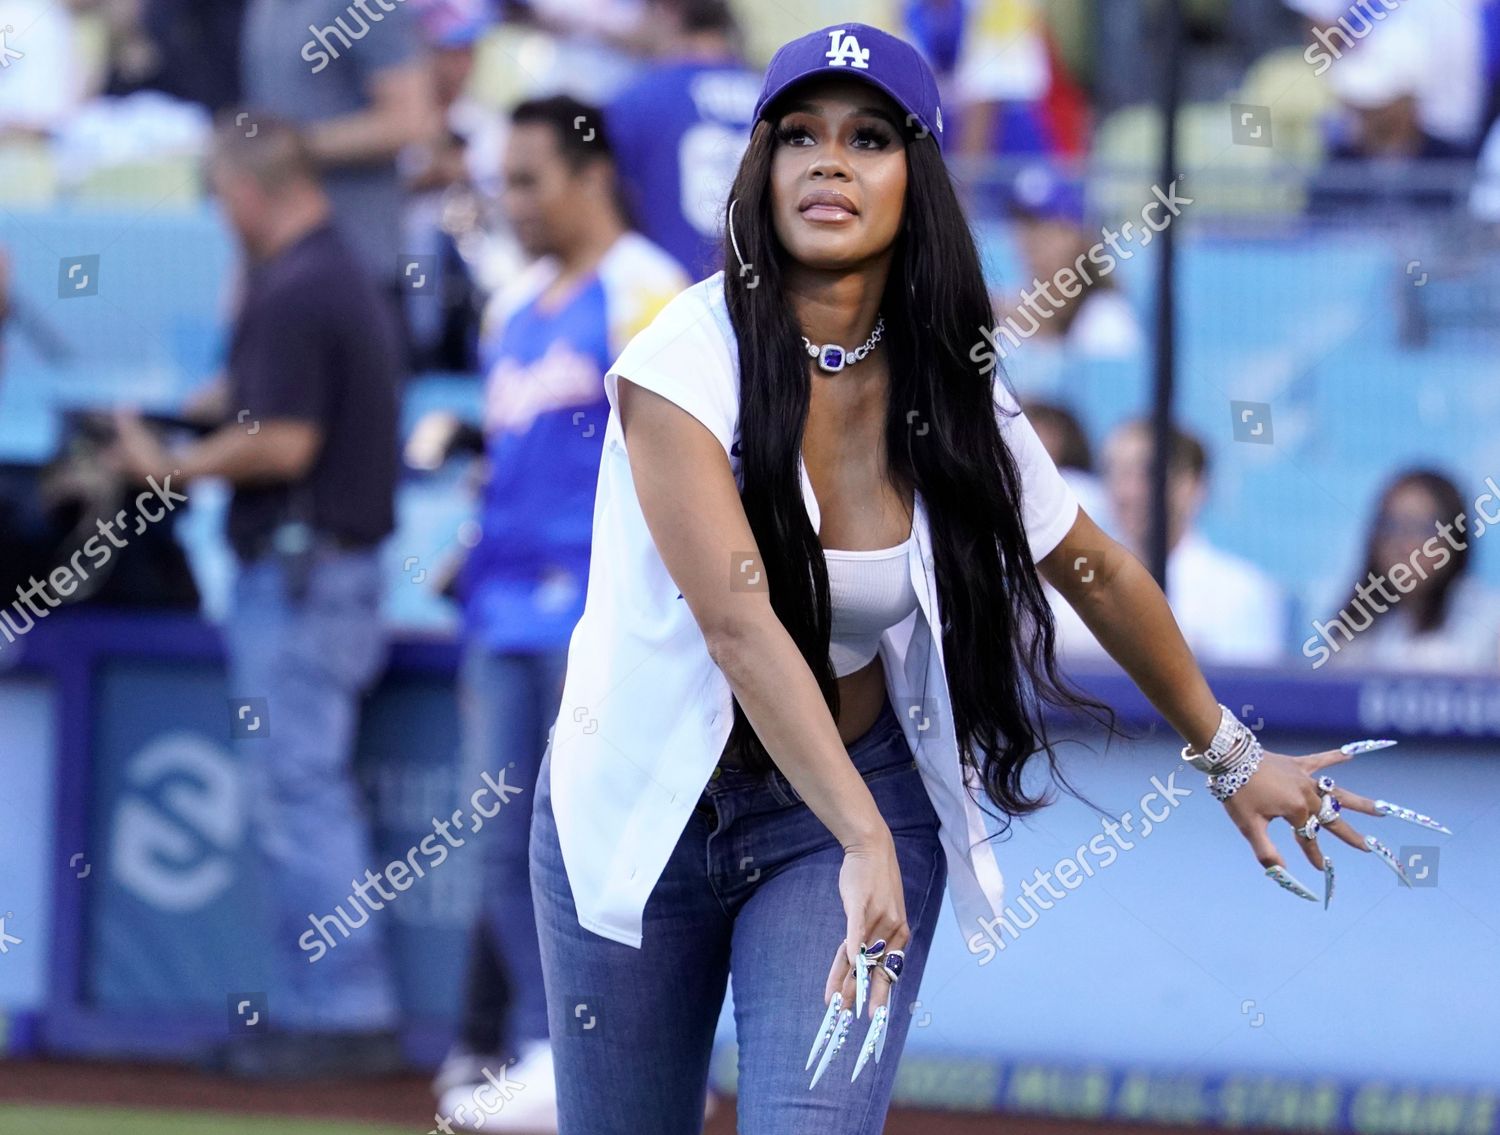 Saweetie Throws Out First Pitch At L.A. Dodgers Gme